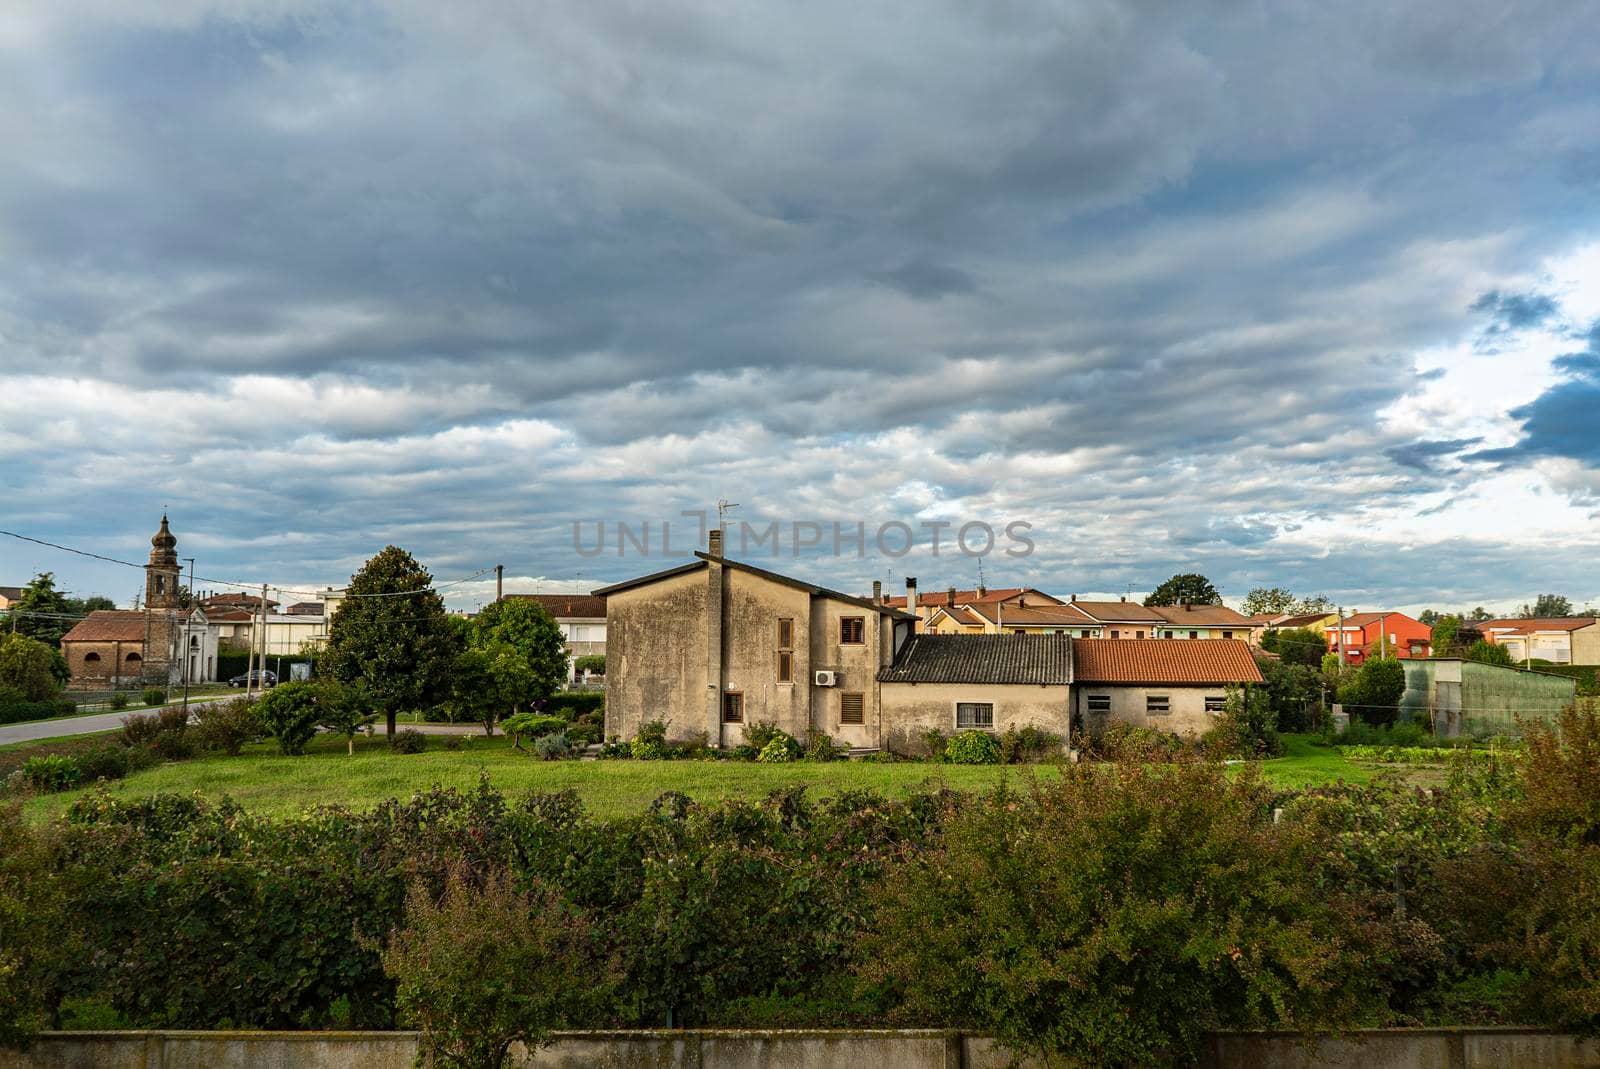 Countryside village cloudy landscape by pippocarlot